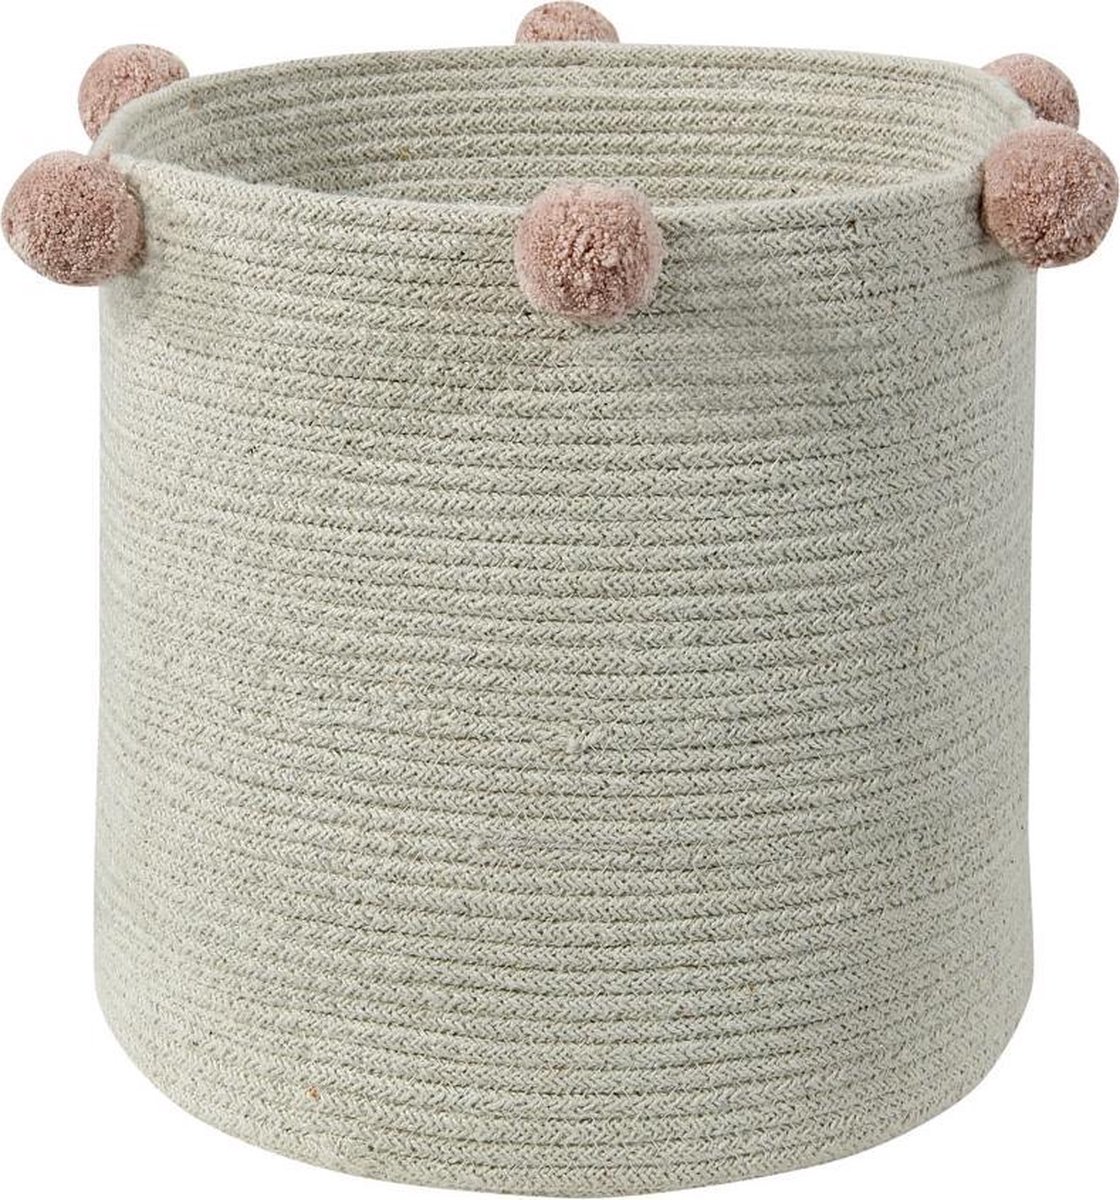 Lorena Canals - Basket Bubbly - Natural Nude - 30x30 cm